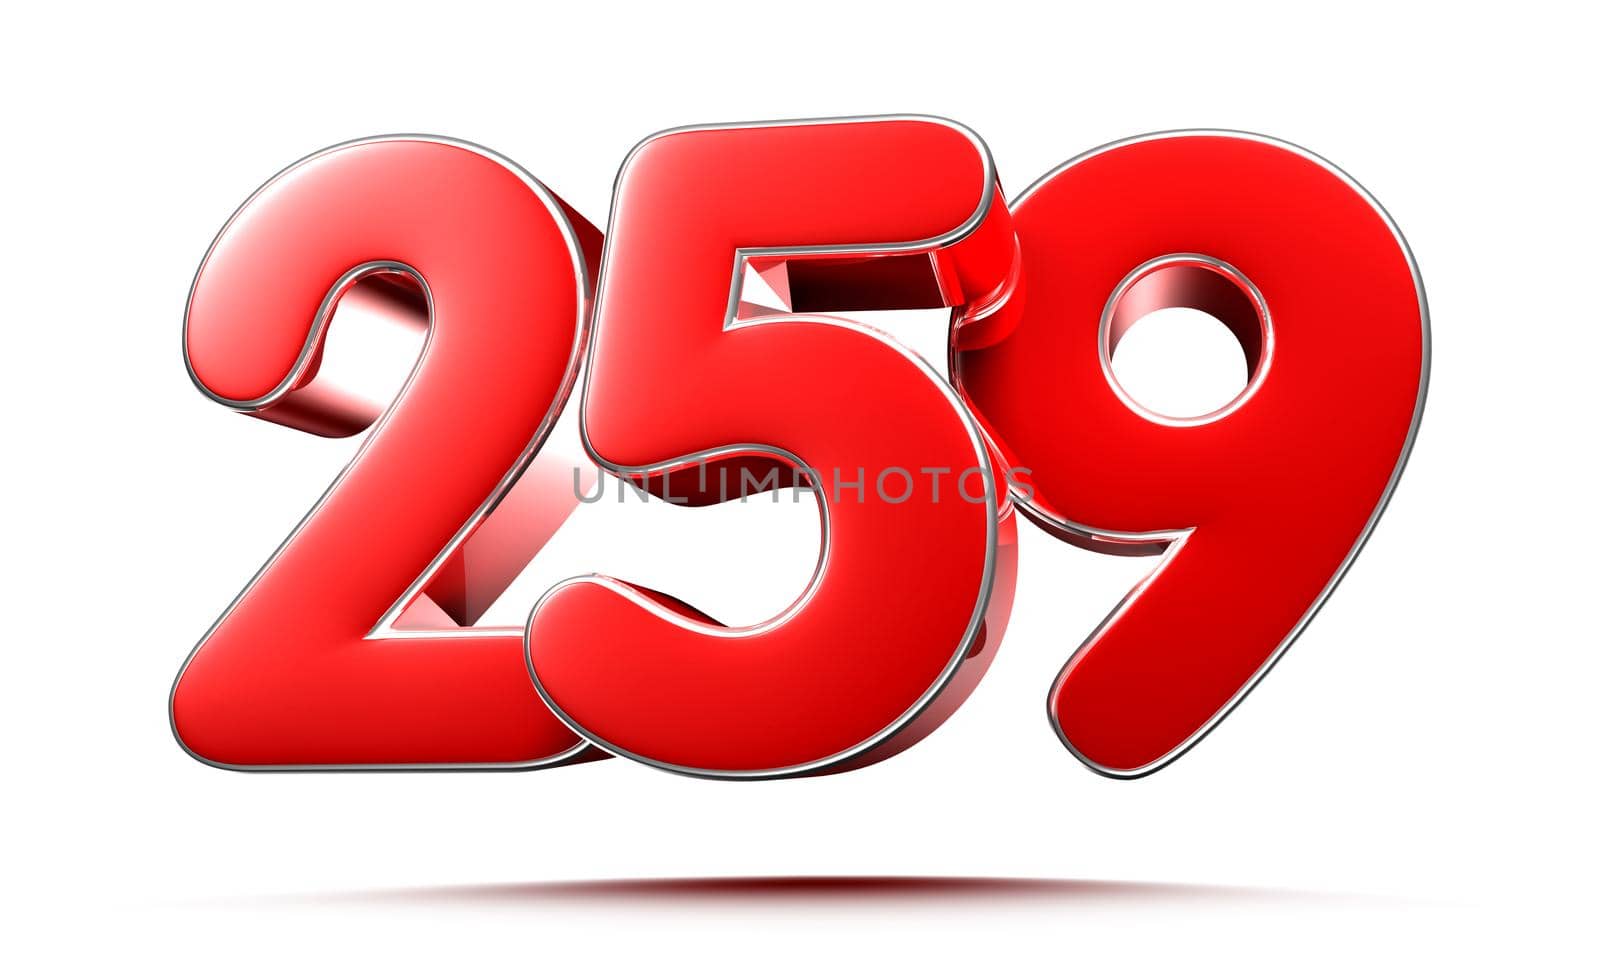 Rounded red numbers 259 on white background 3D illustration with clipping path by thitimontoyai